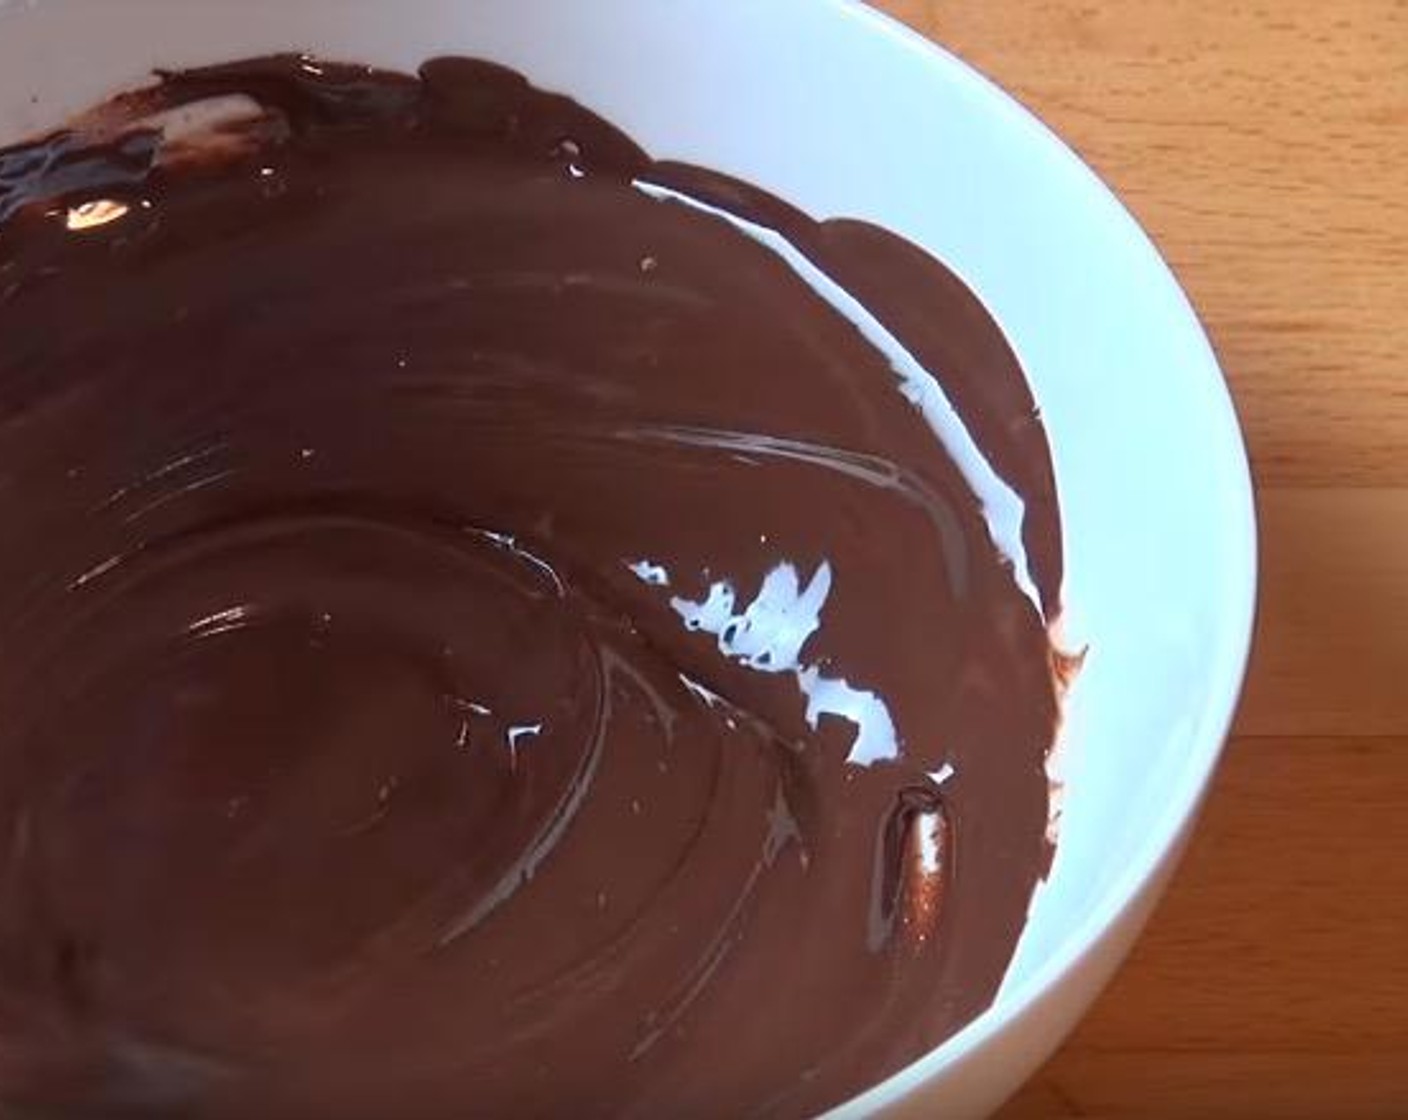 step 6 For the chocolate layer, combine Dark Chocolate (1 cup) and Vegetable Oil (1 Tbsp) in a microwave-safe bowl. Heat for 30 seconds, stir, and repeat until chocolate is melted and smooth.